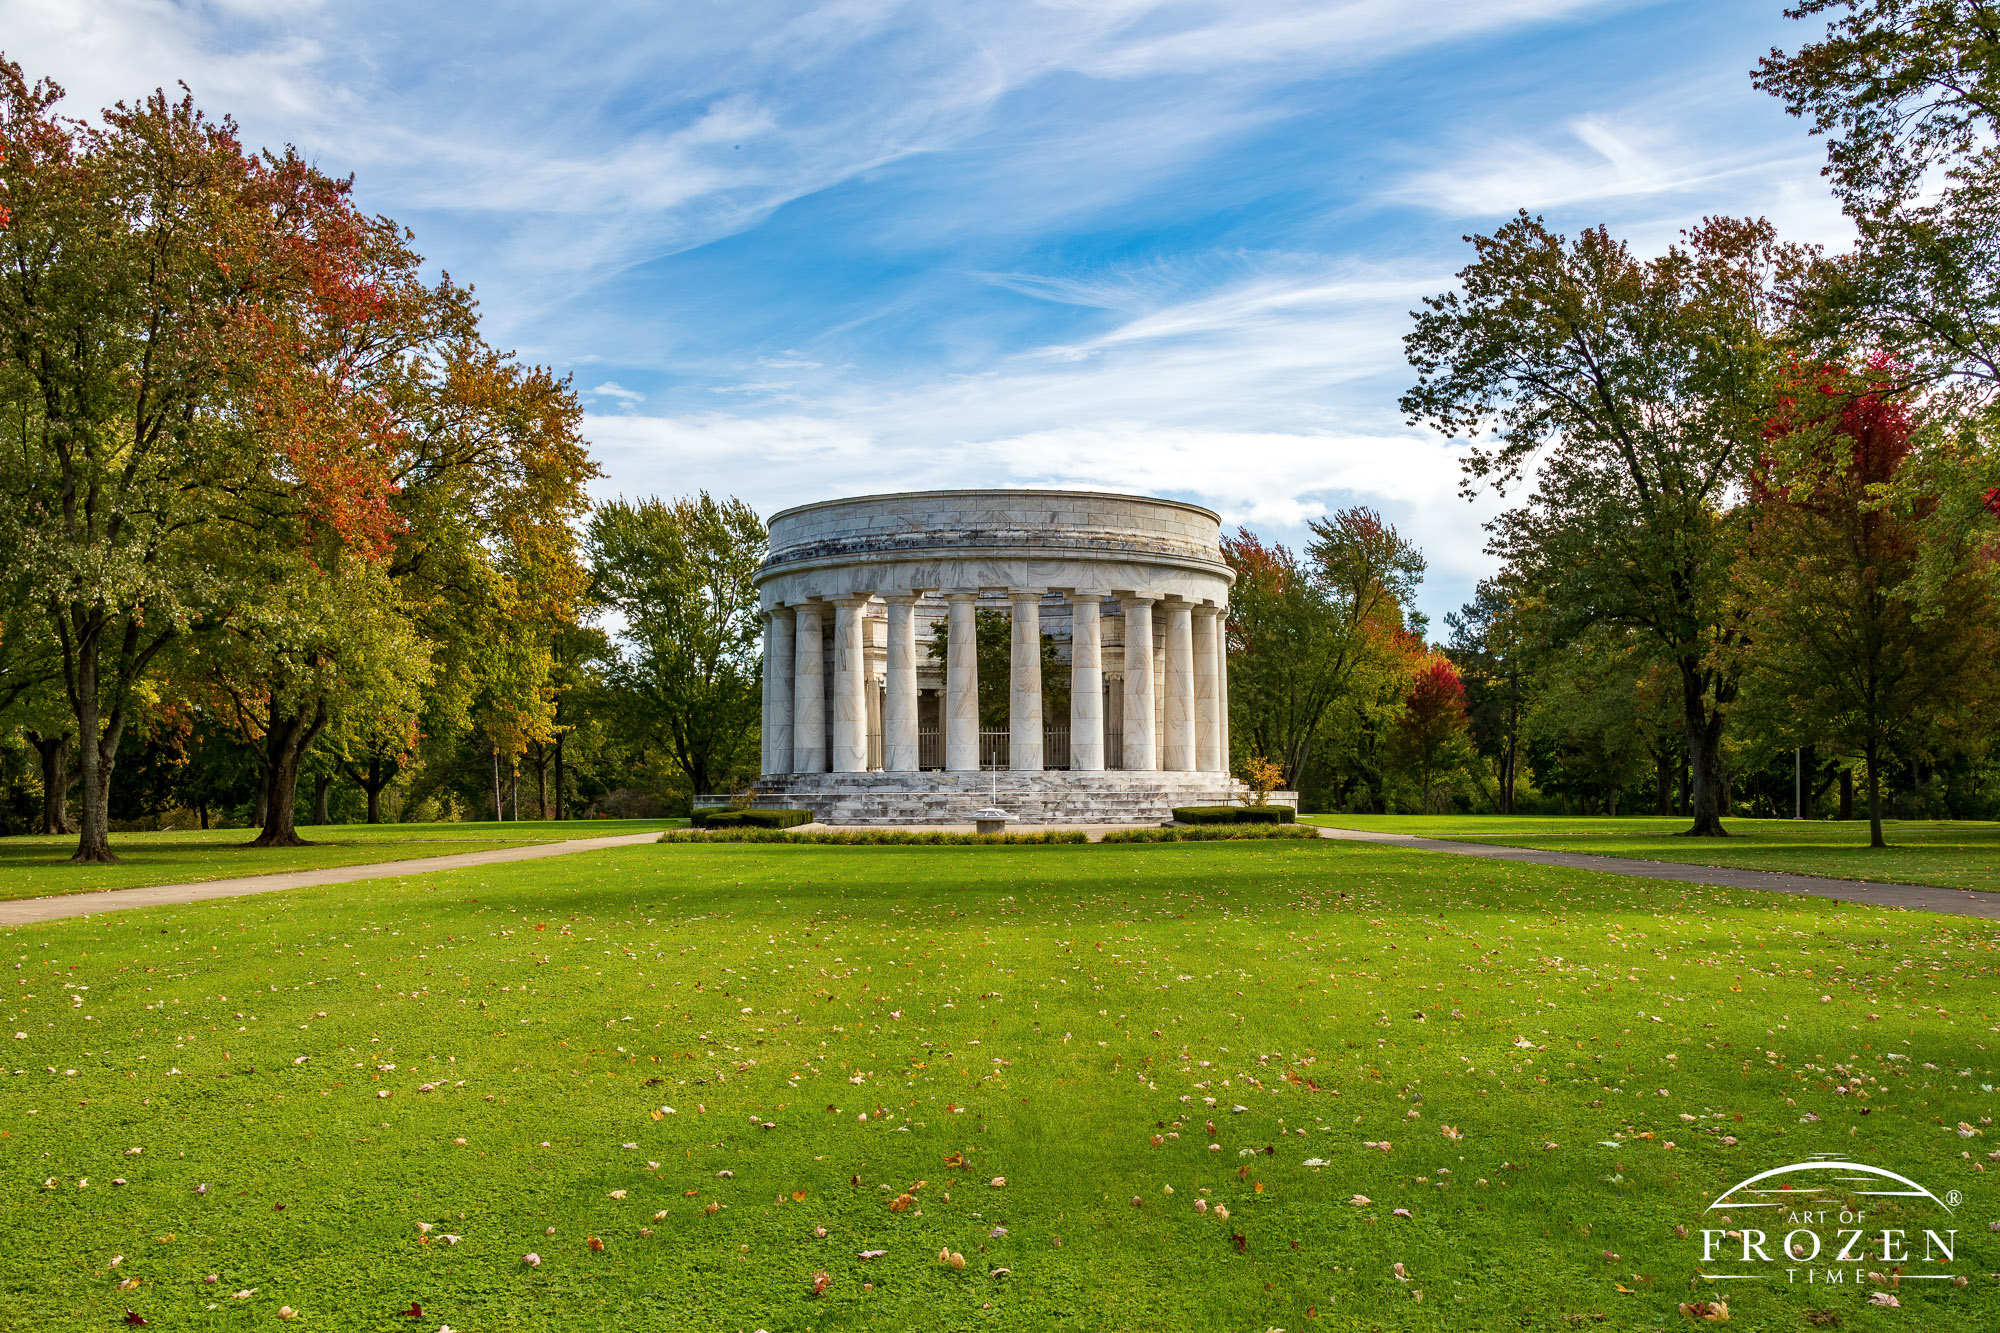 President Warren Harding Memorial on an early fall day which shows its Greek architecture and doric columns